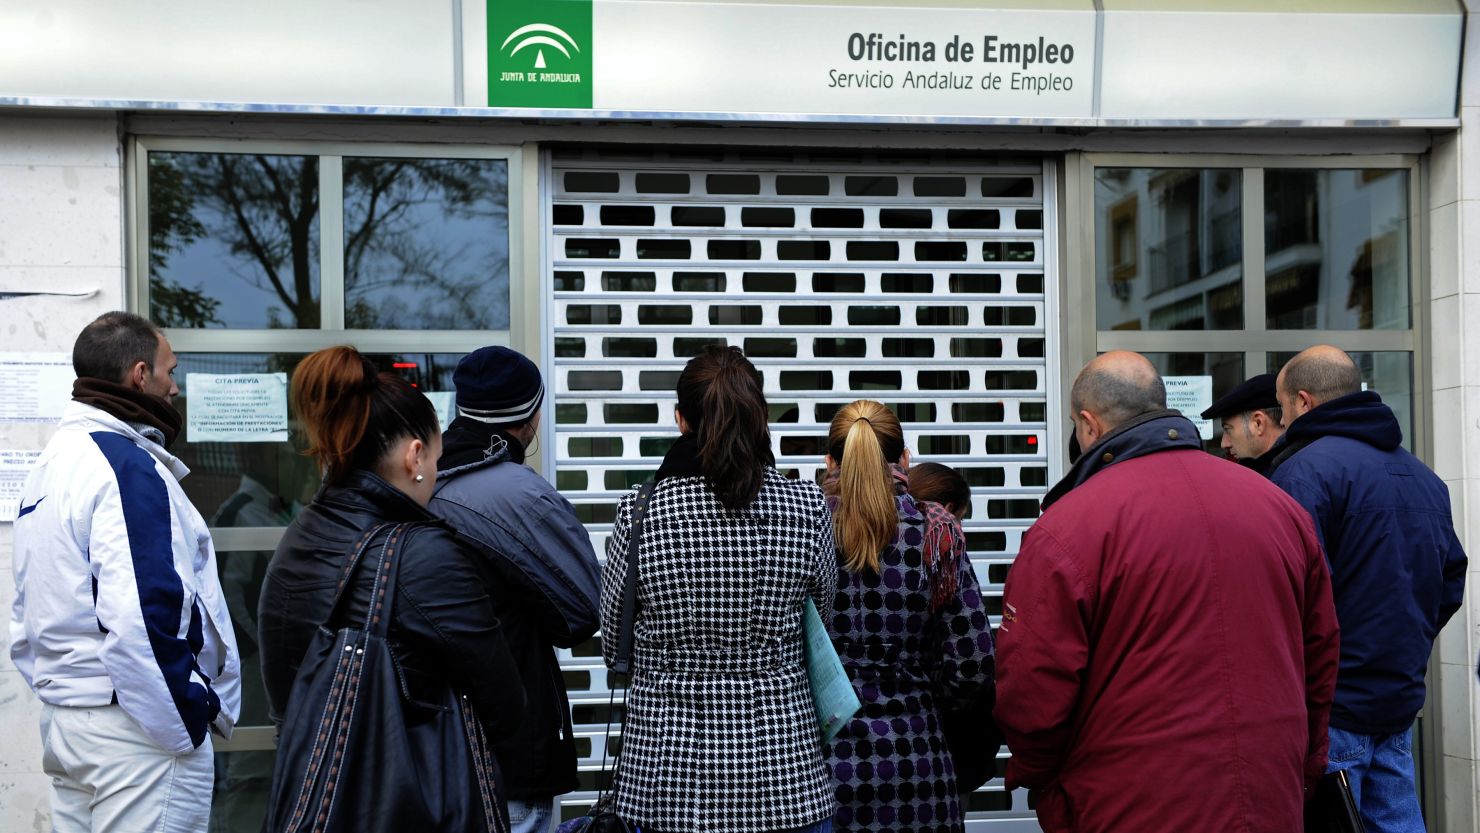 People wait in line in front of a government employment office in Sevilla, Spain, in early 2012.